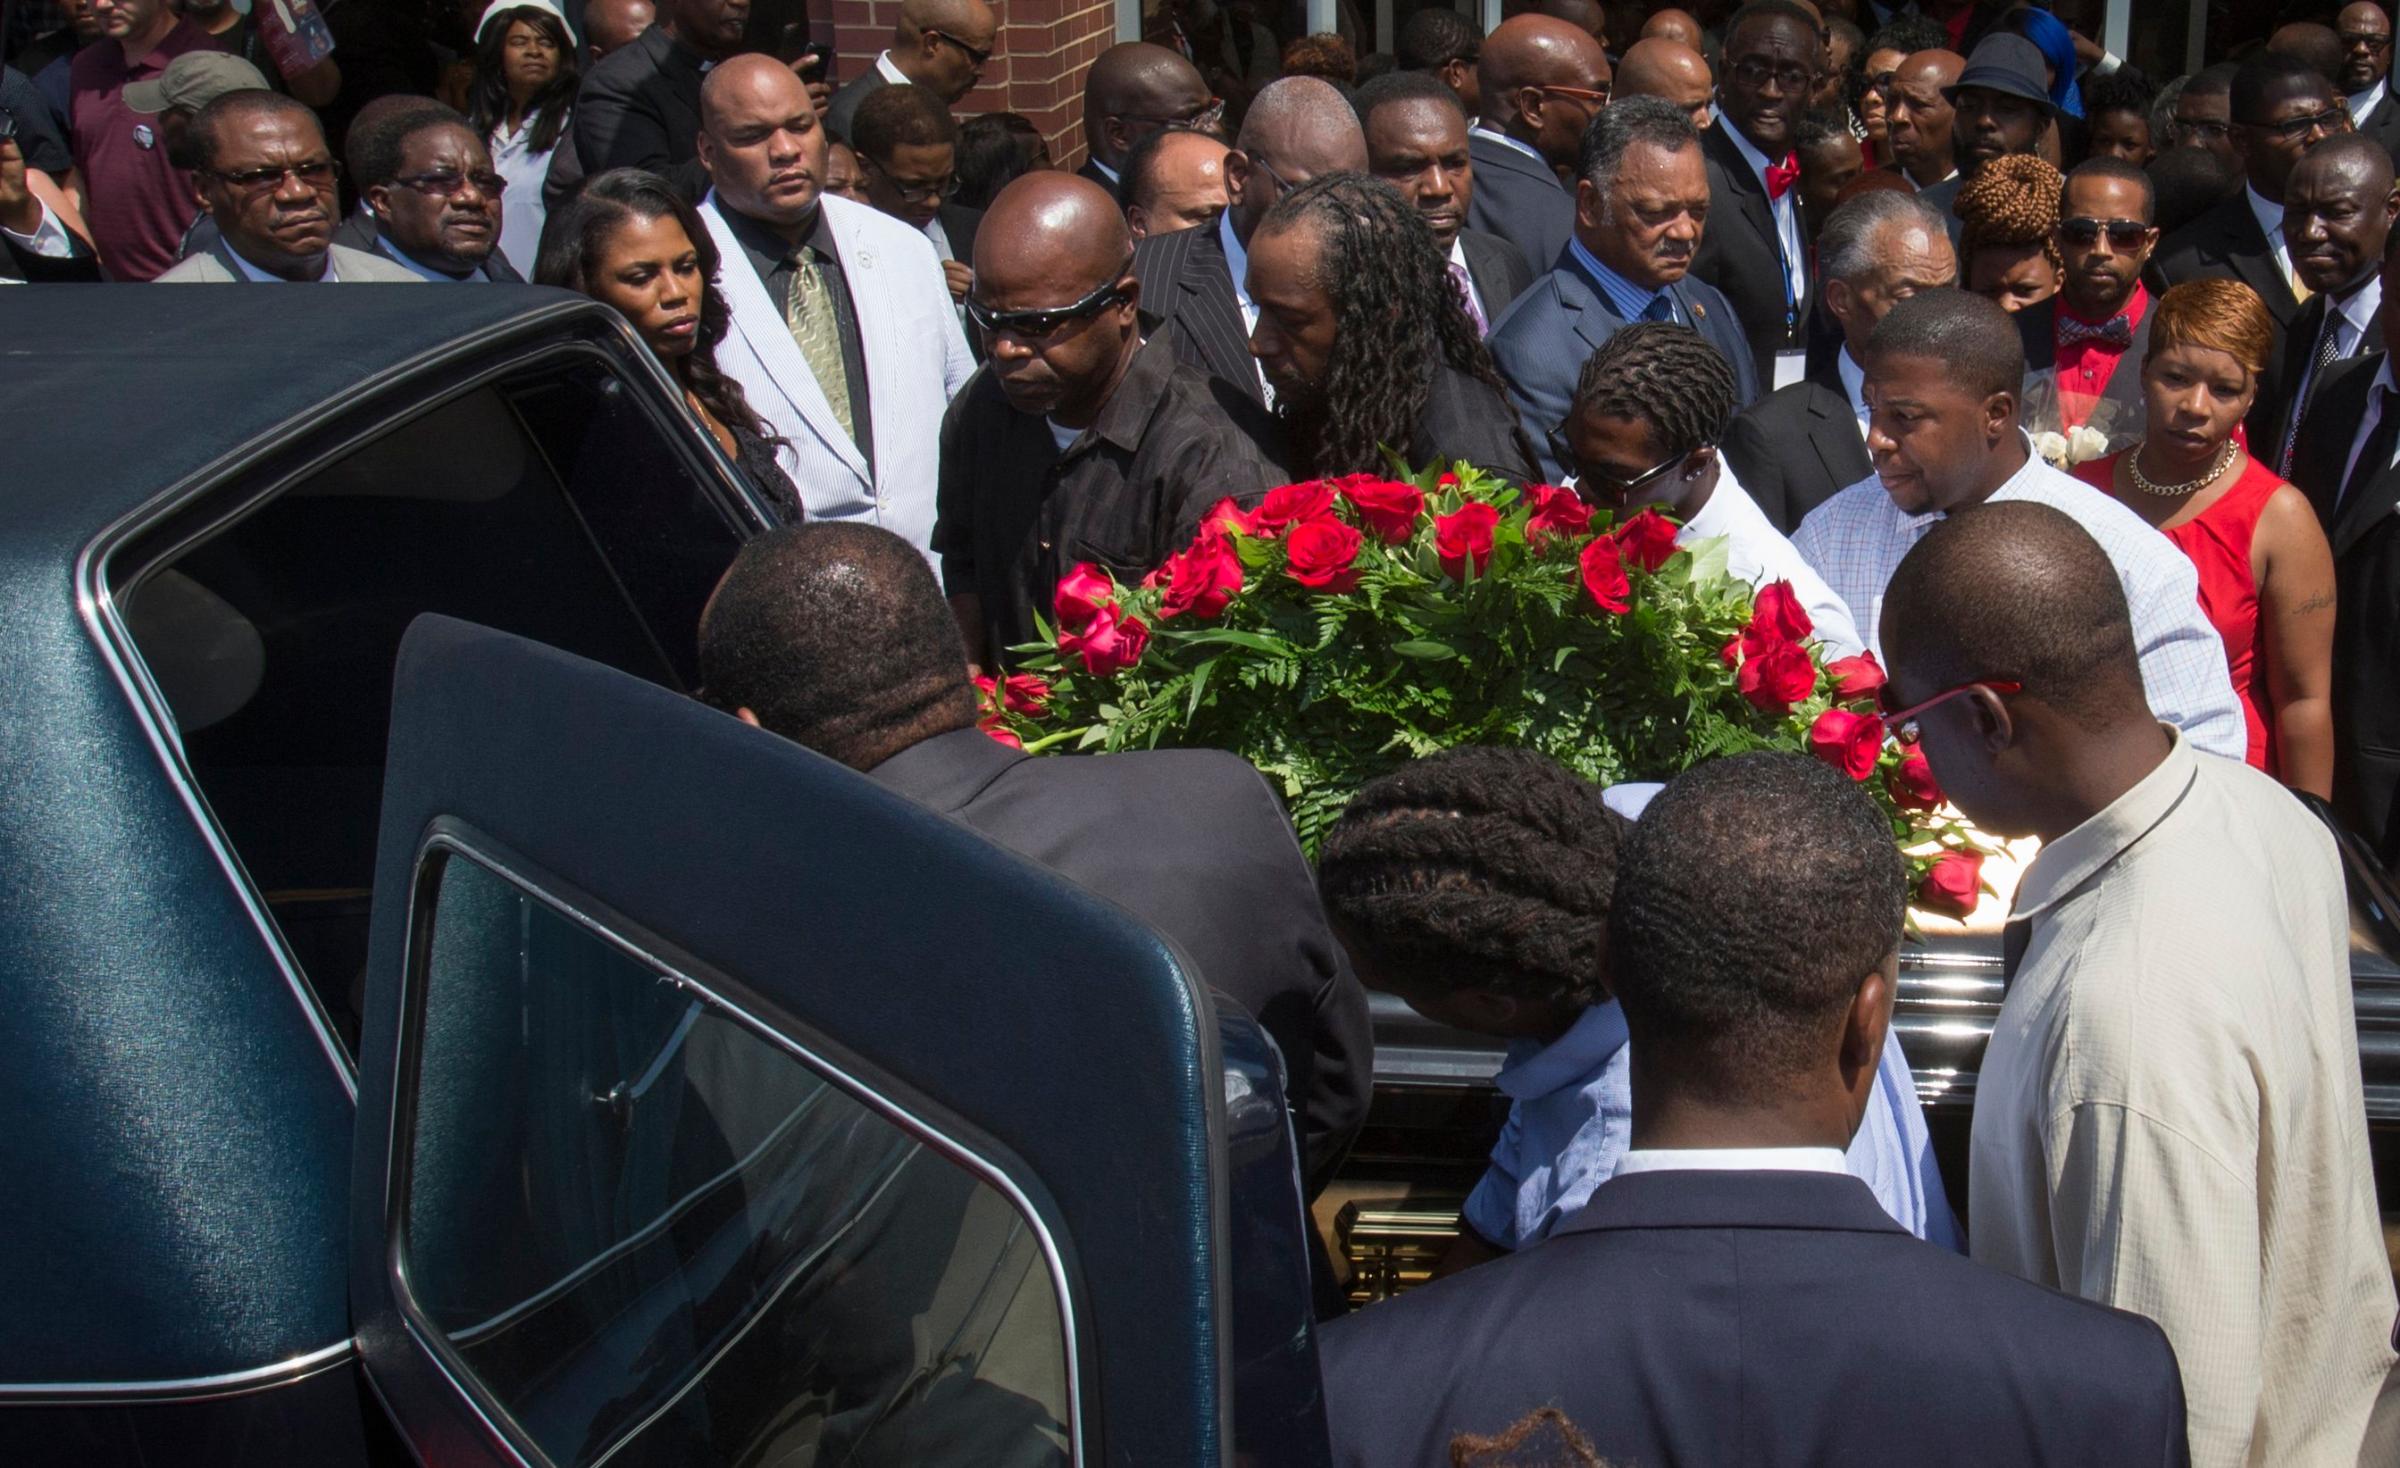 Lesley McSpadden watches as the casket containing the body of her son Michael Brown lifted into a hearse after his funeral services at Friendly Temple Missionary Baptist Church, St. Louis, Missouri